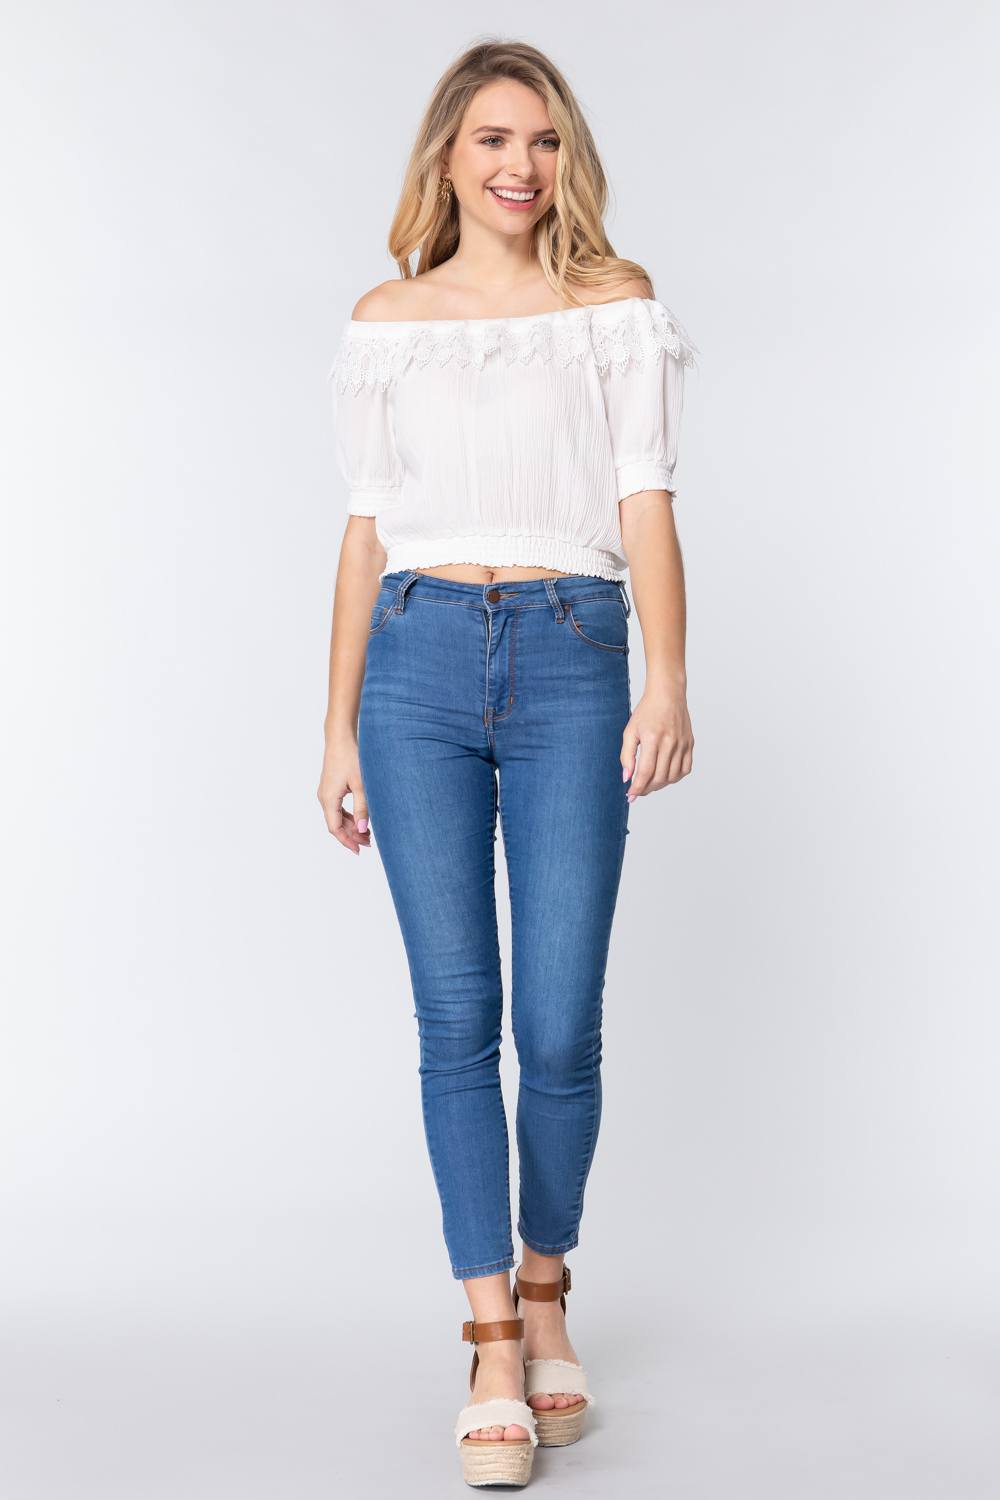 Off White Off Shoulder Lace Detailed Women's Top